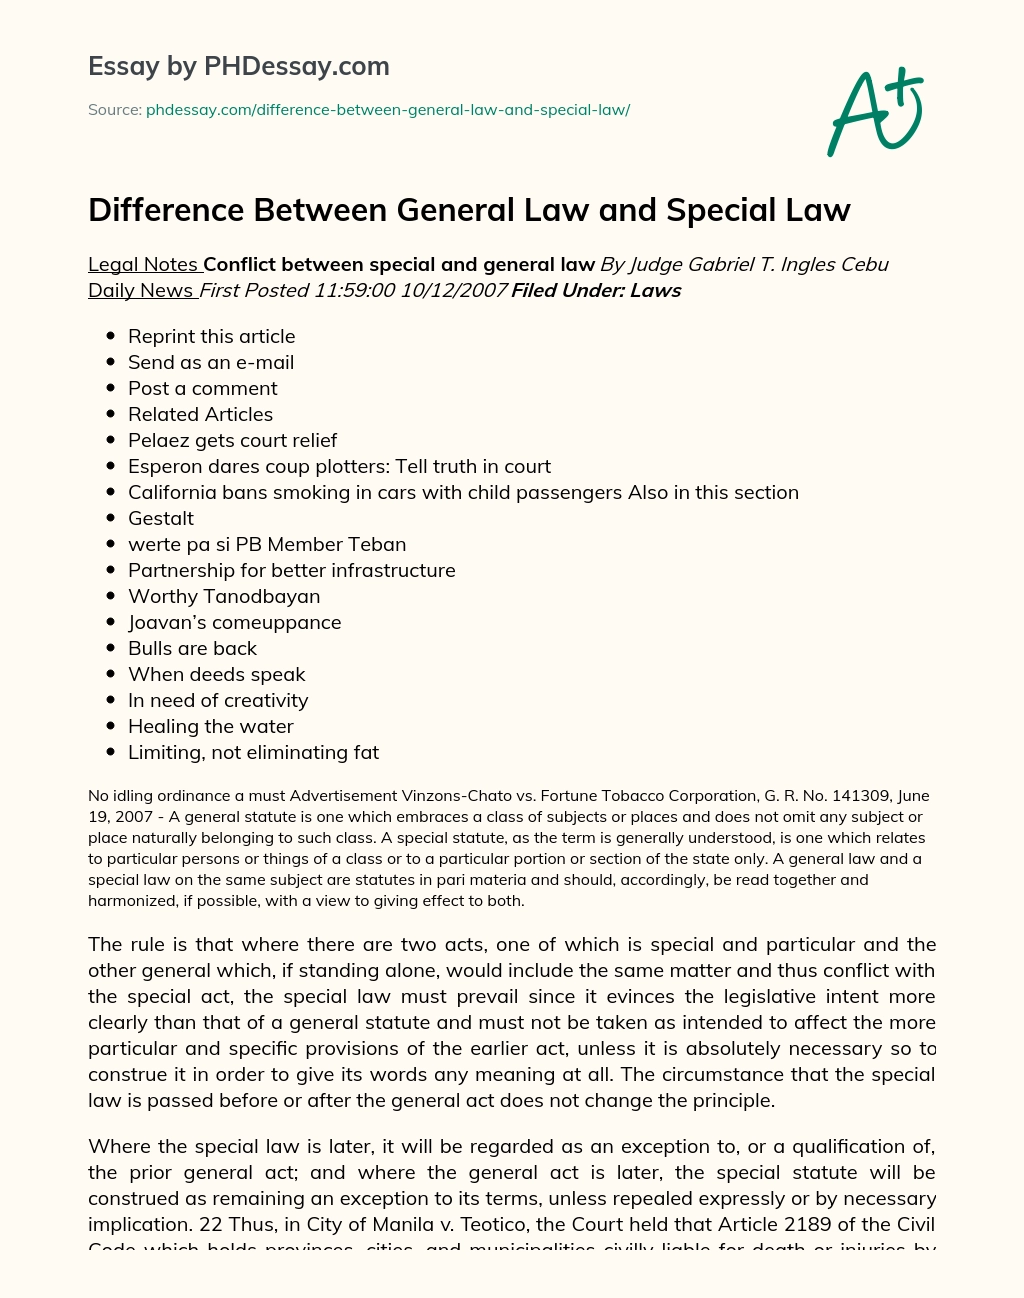 Difference Between General Law and Special Law essay